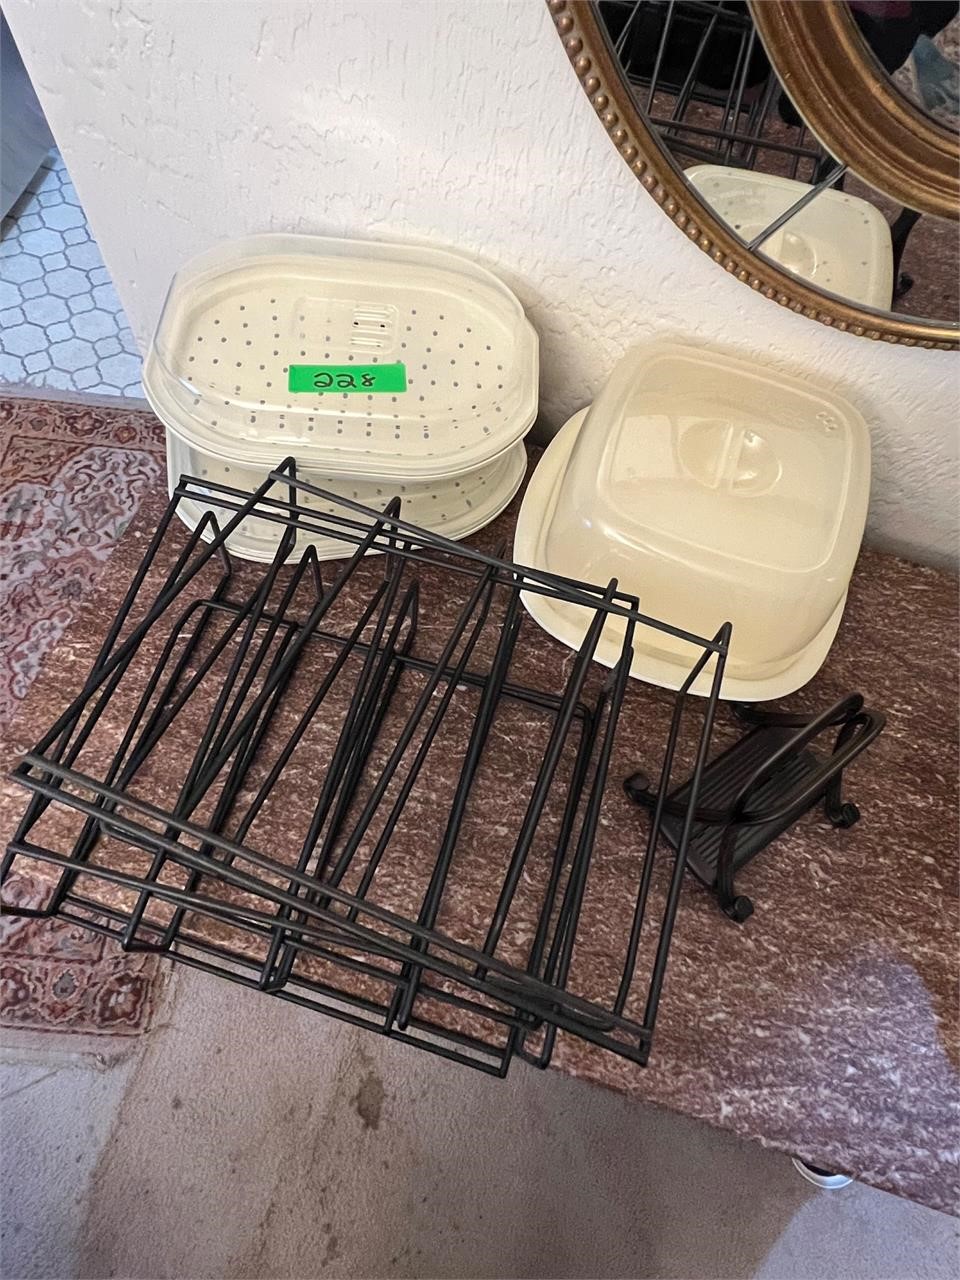 Microwave Containers & Pan Organizers